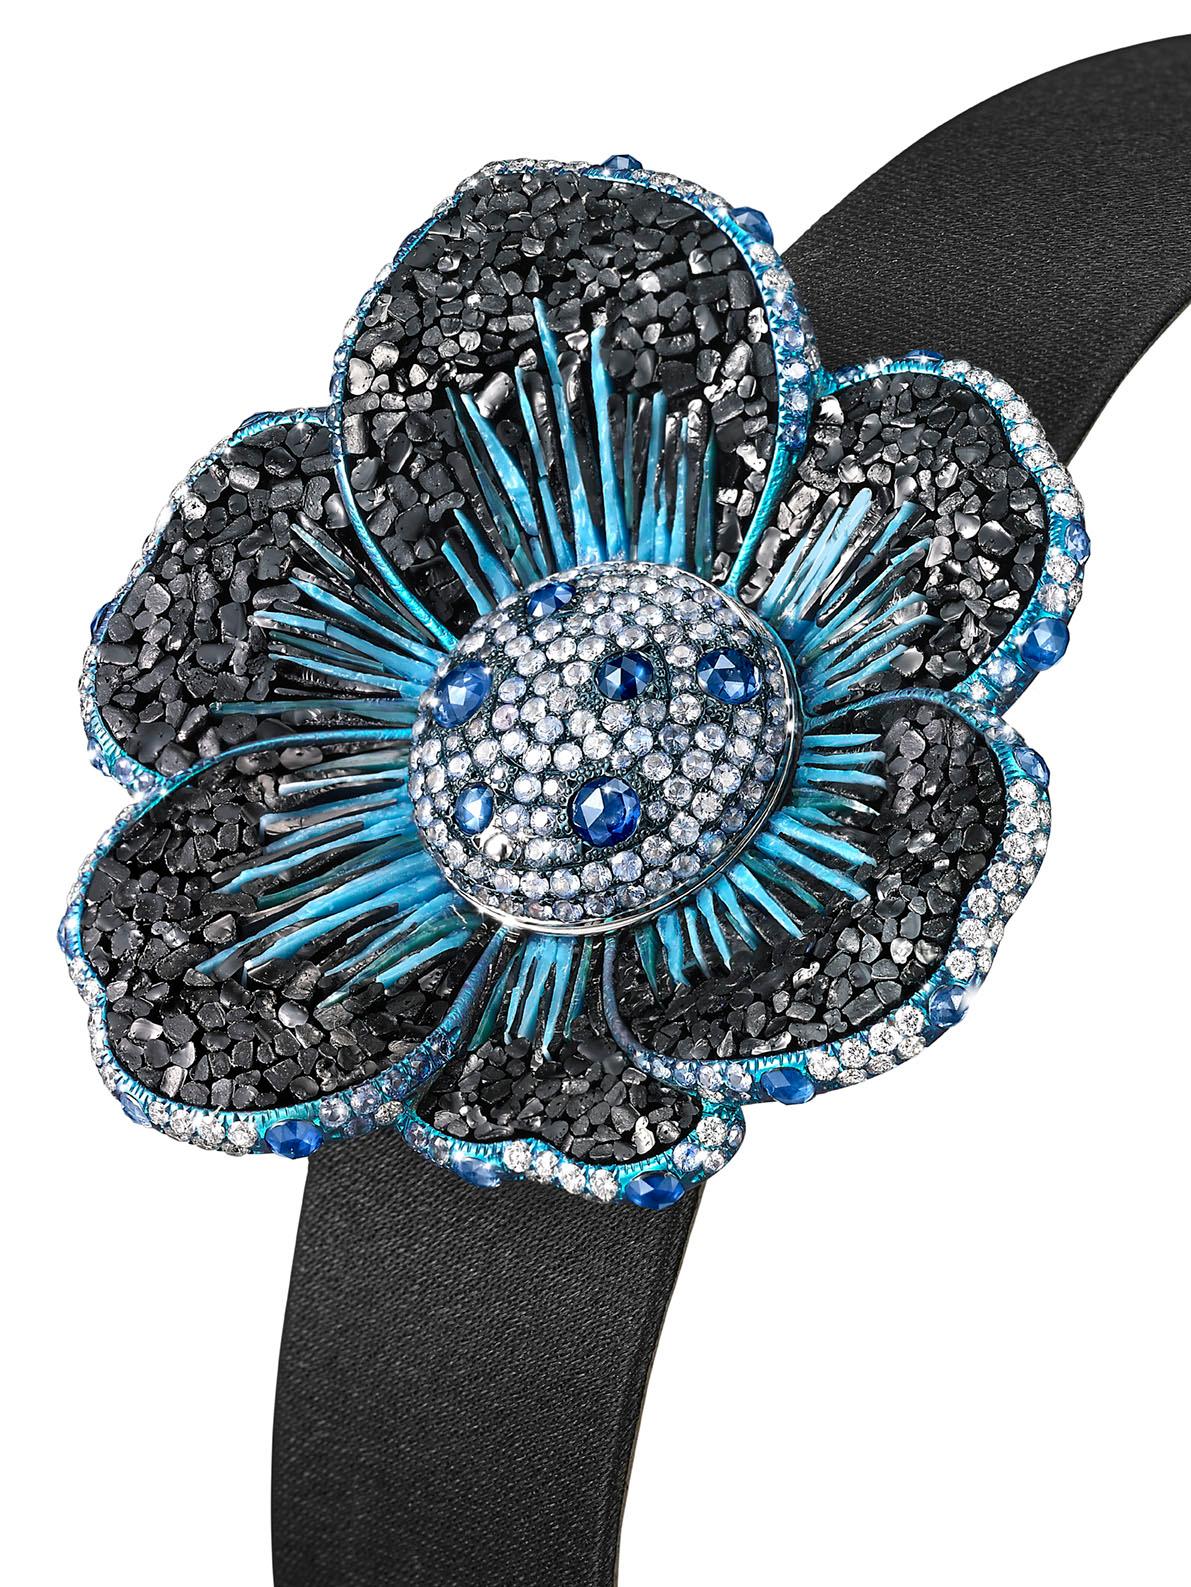 Brilliant Cut Watch Gold White Diamonds Sapphires Satin Strap Hand Decorated with Micro Mosaic For Sale